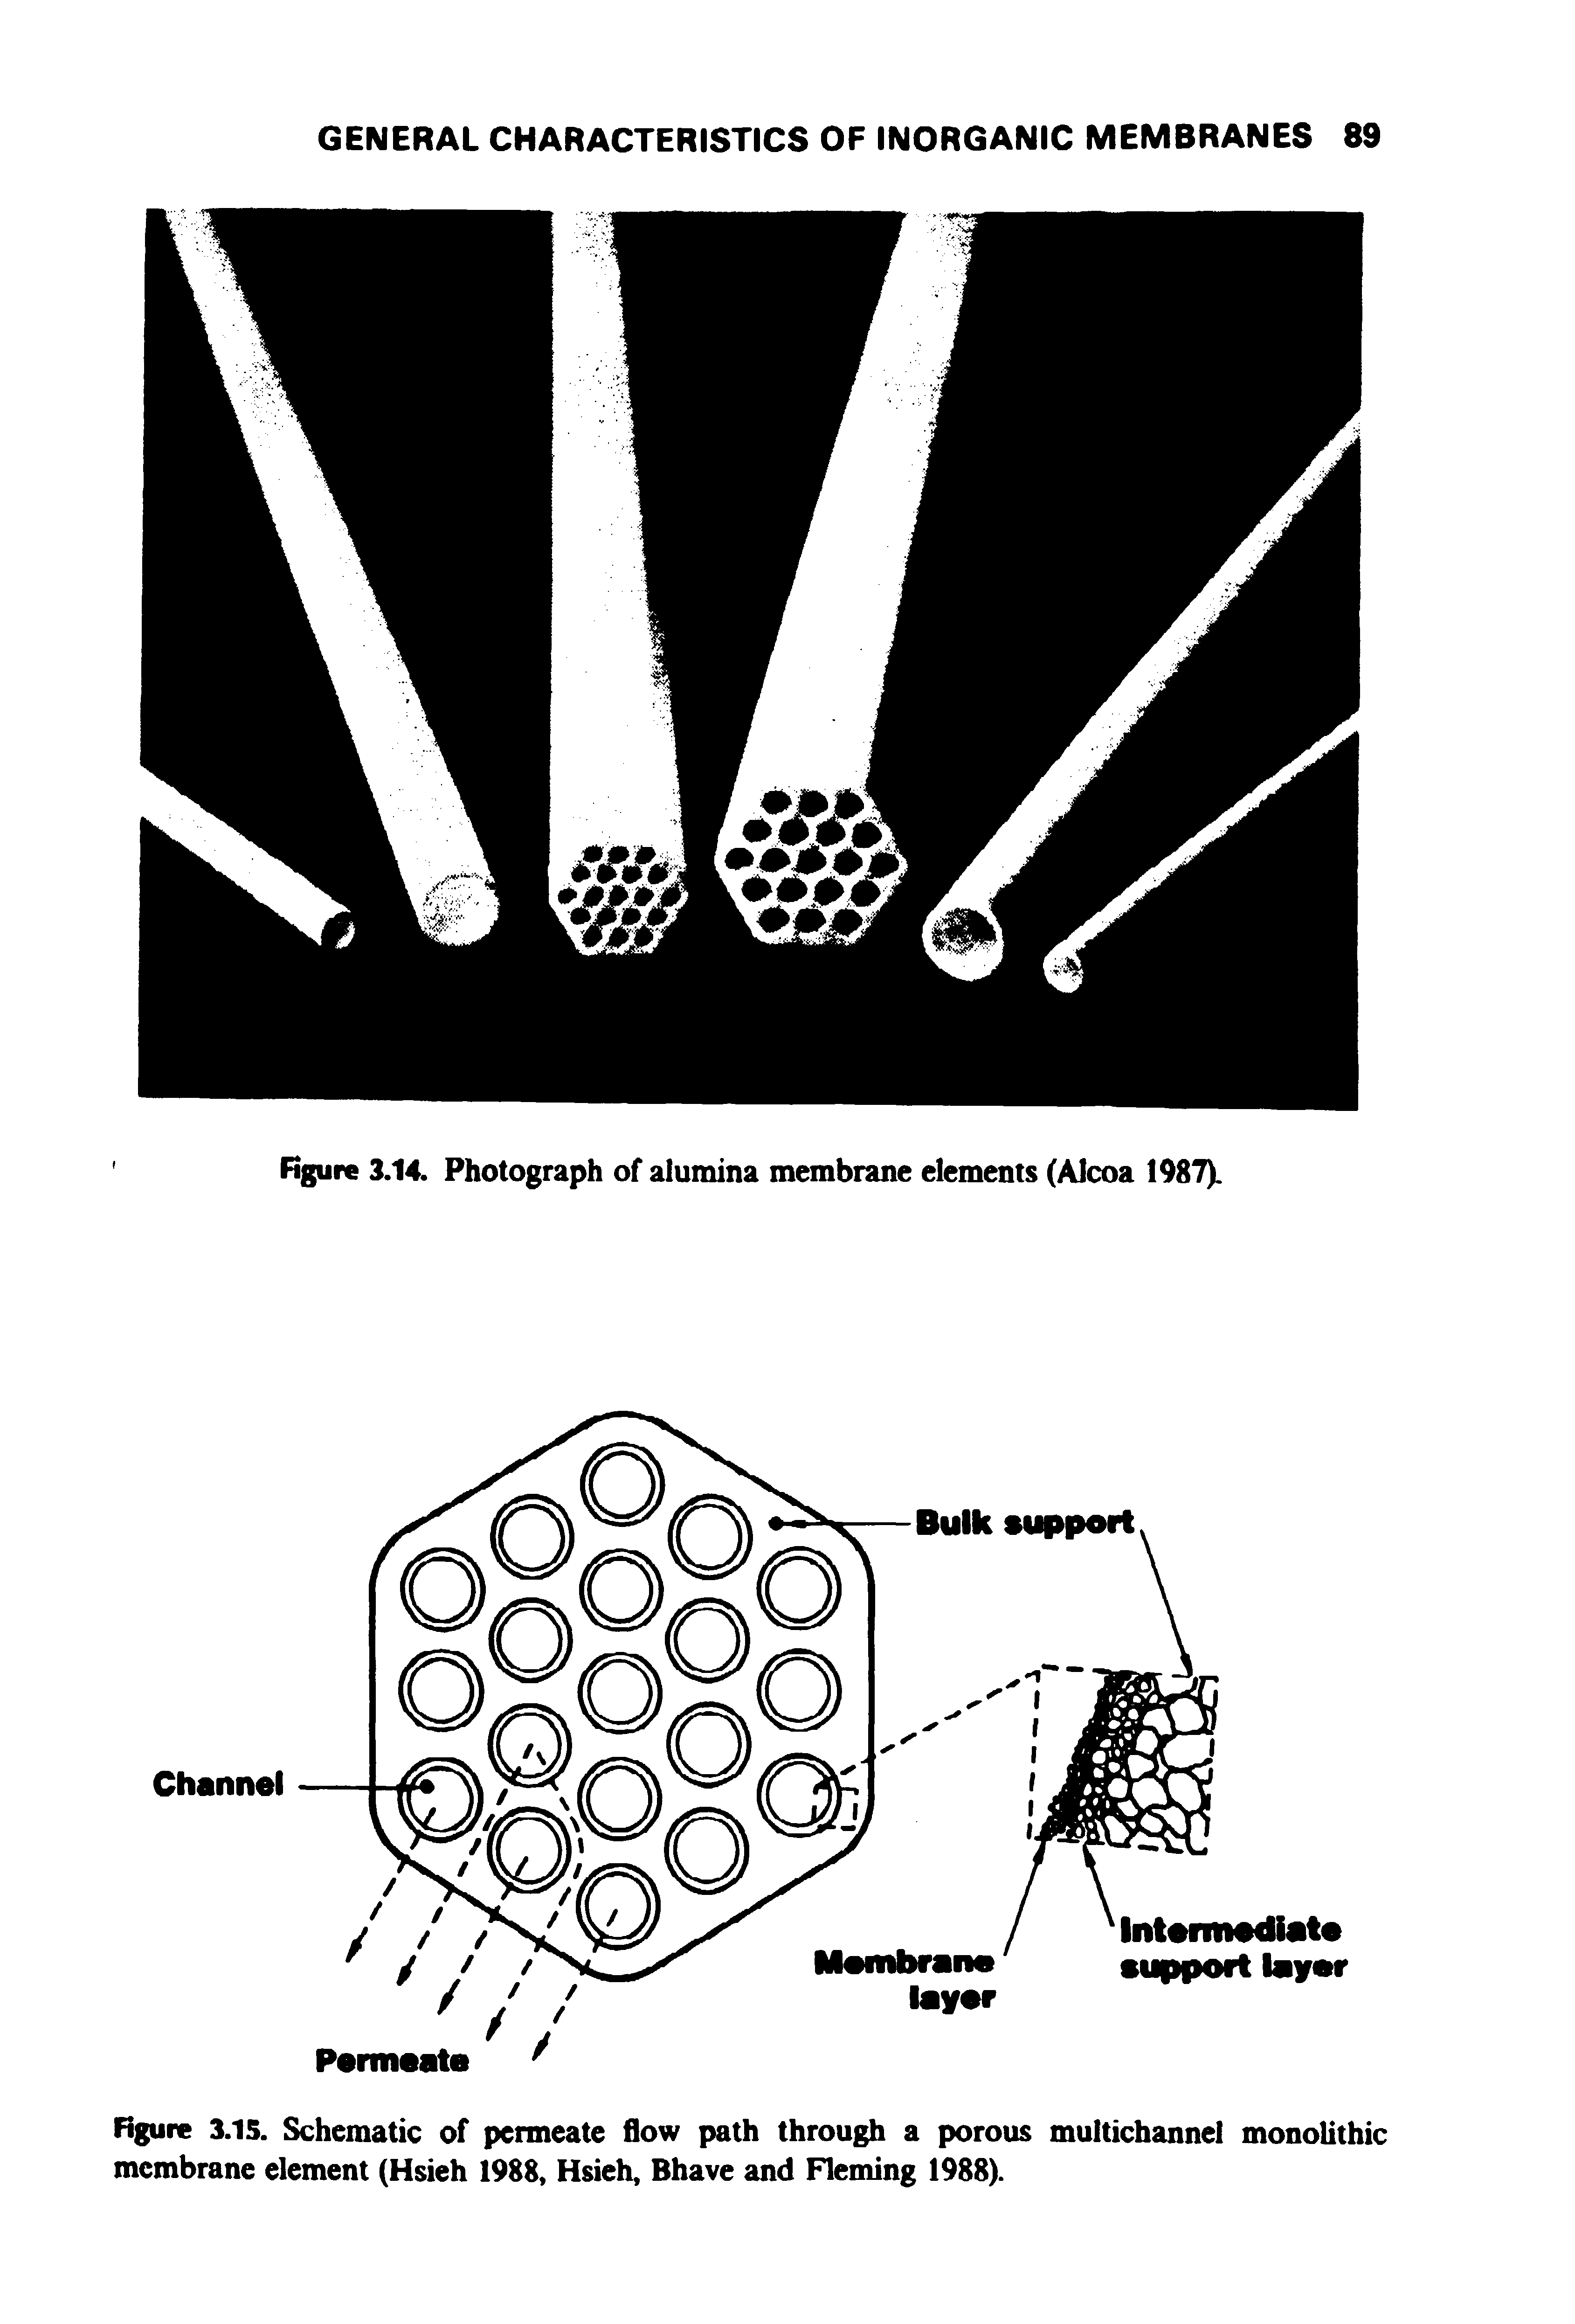 Figure 3.15. Schematic of permeate flow path through a porous multichannel monolithic membrane element (Hsieh 1988, Hsieh, Bhave and Fleming 1988).